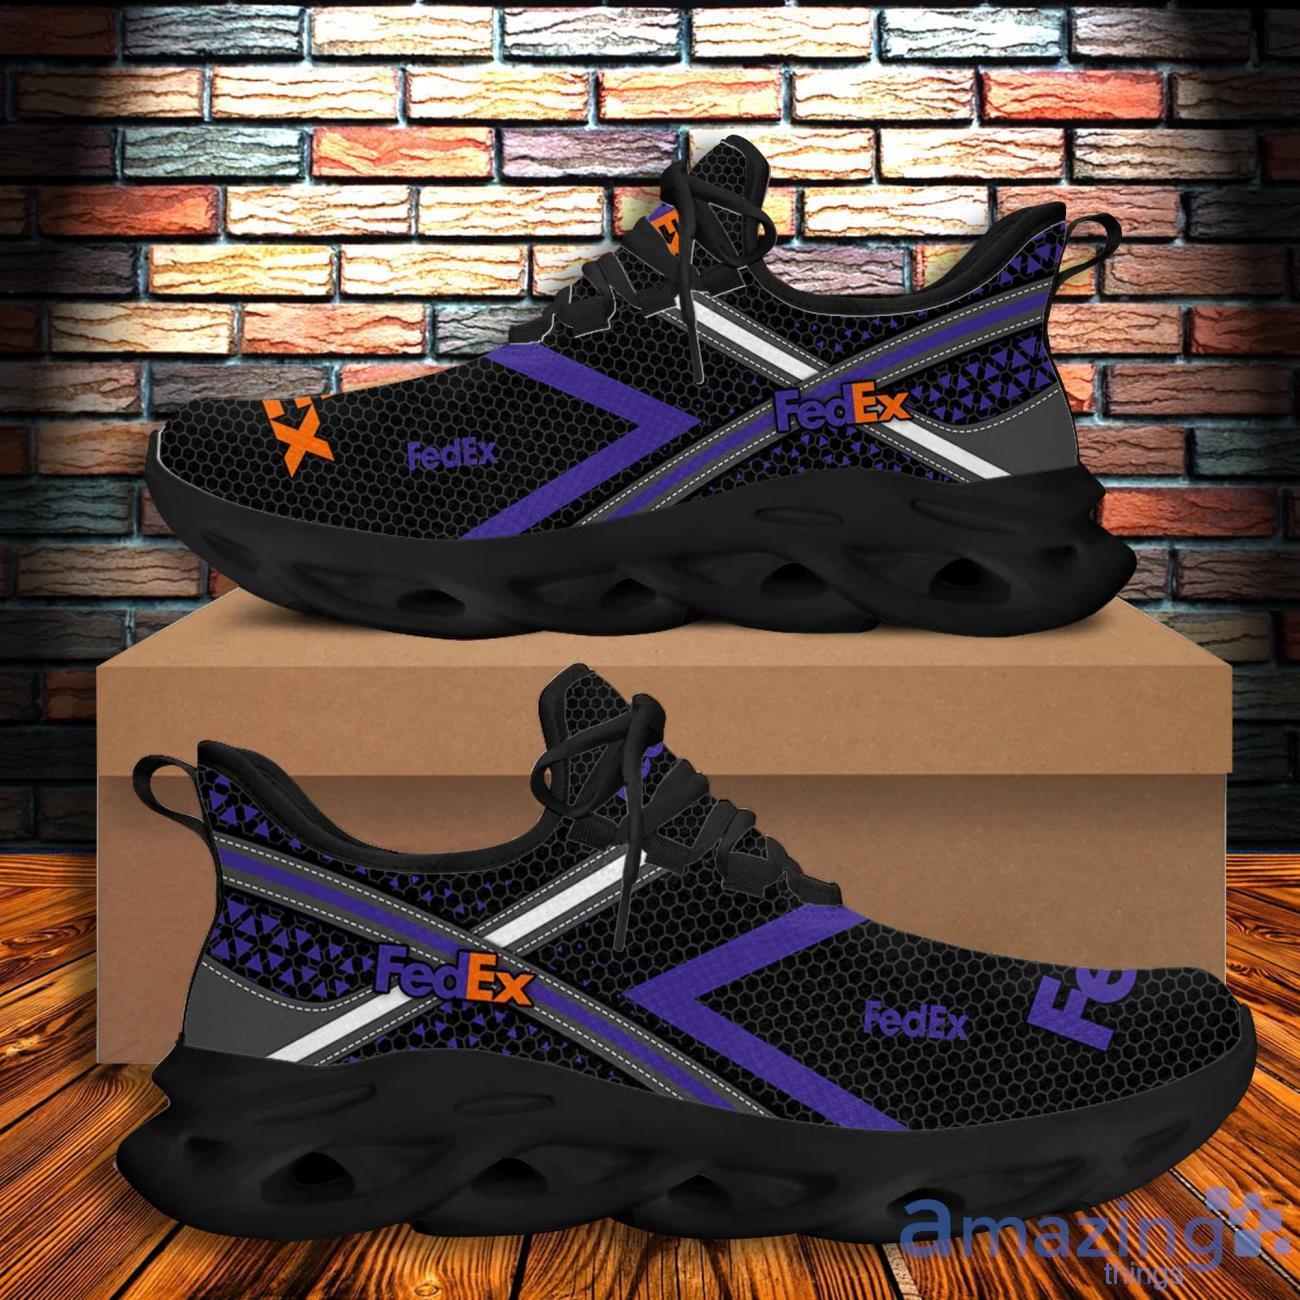 Fedex Max Soul Shoes Exclusive Sport Sneakers For Men Women Product Photo 1